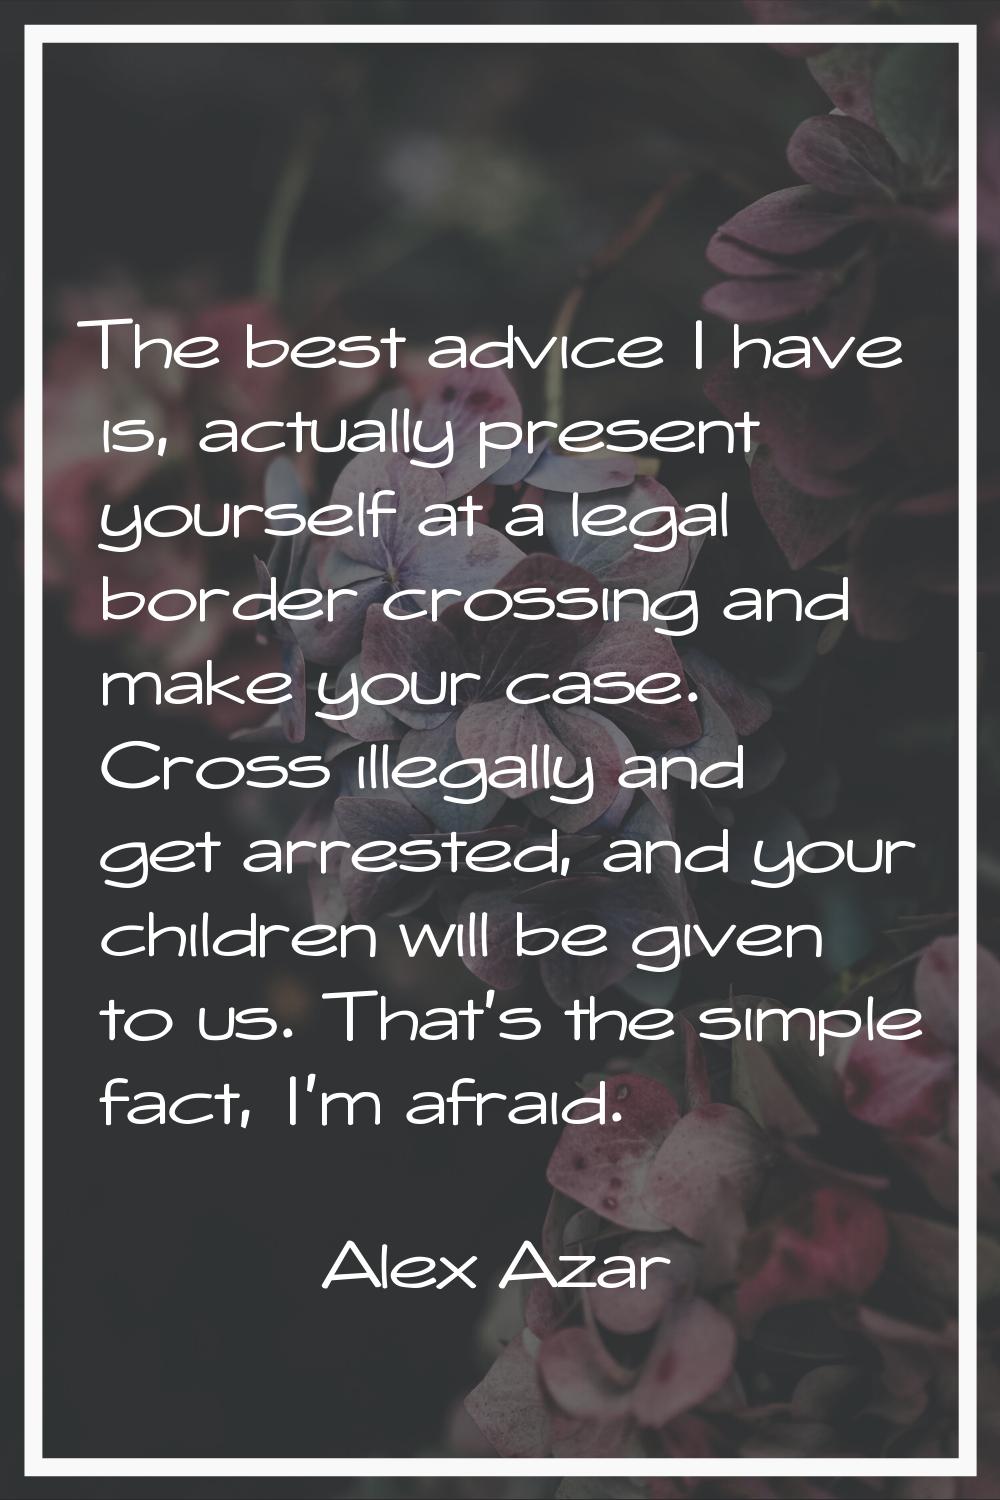 The best advice I have is, actually present yourself at a legal border crossing and make your case.